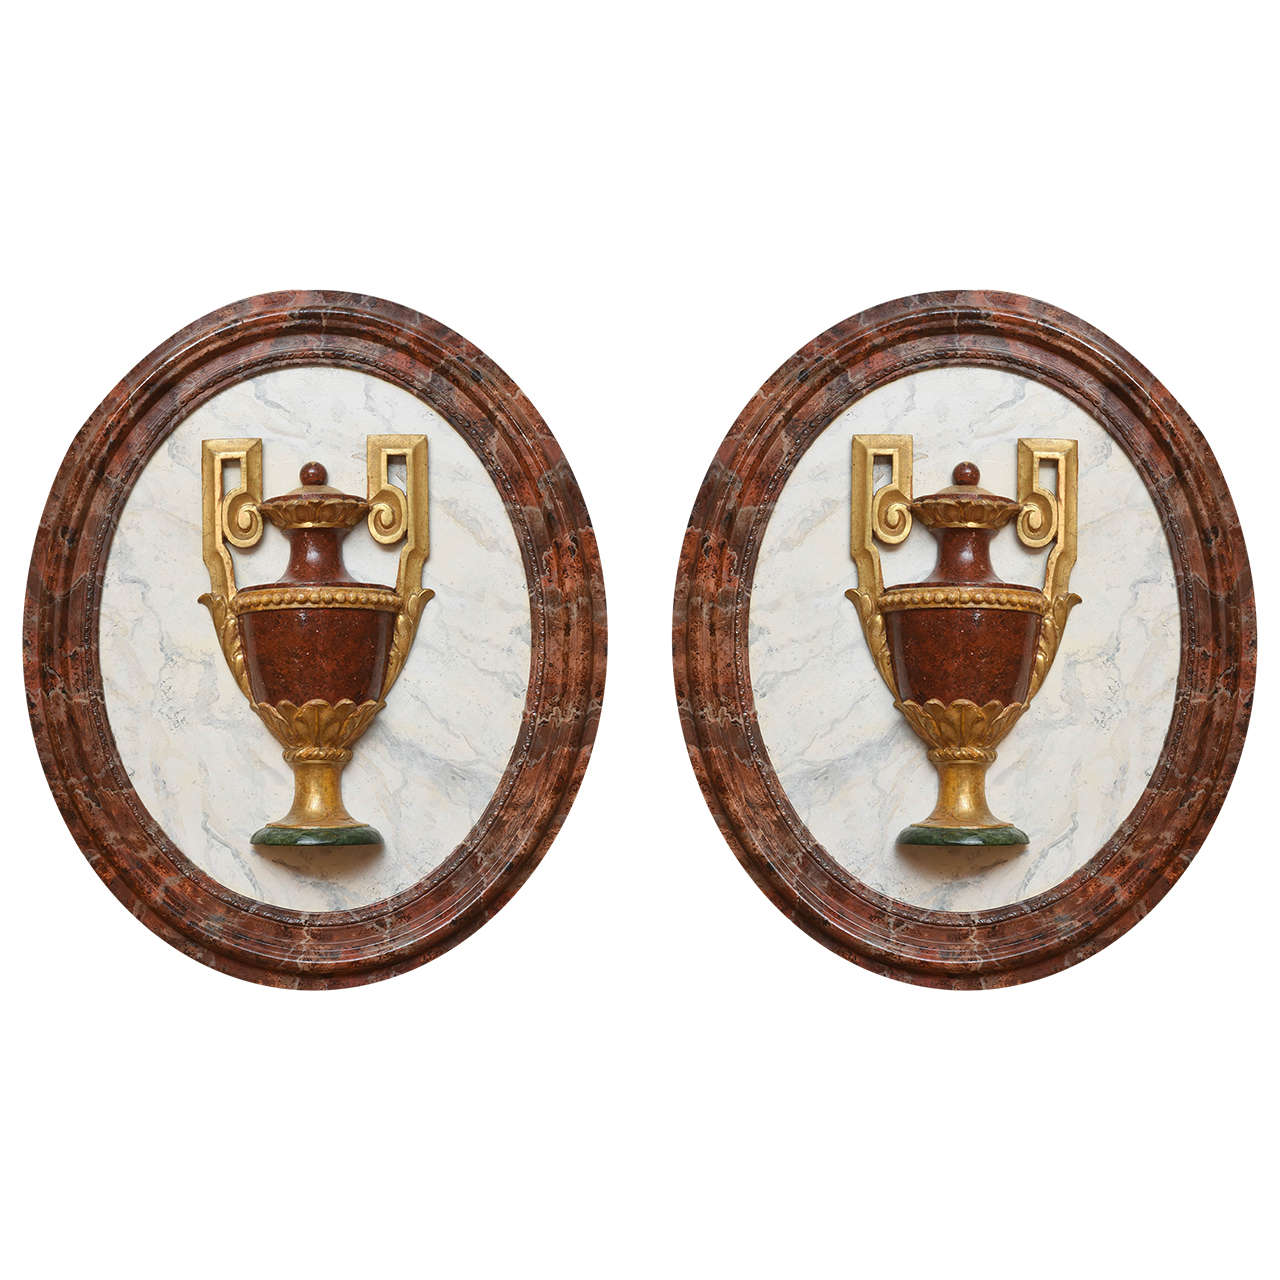 Pair of Neoclassical Faux Marbre Trompe L'Oeil Wall Plaques